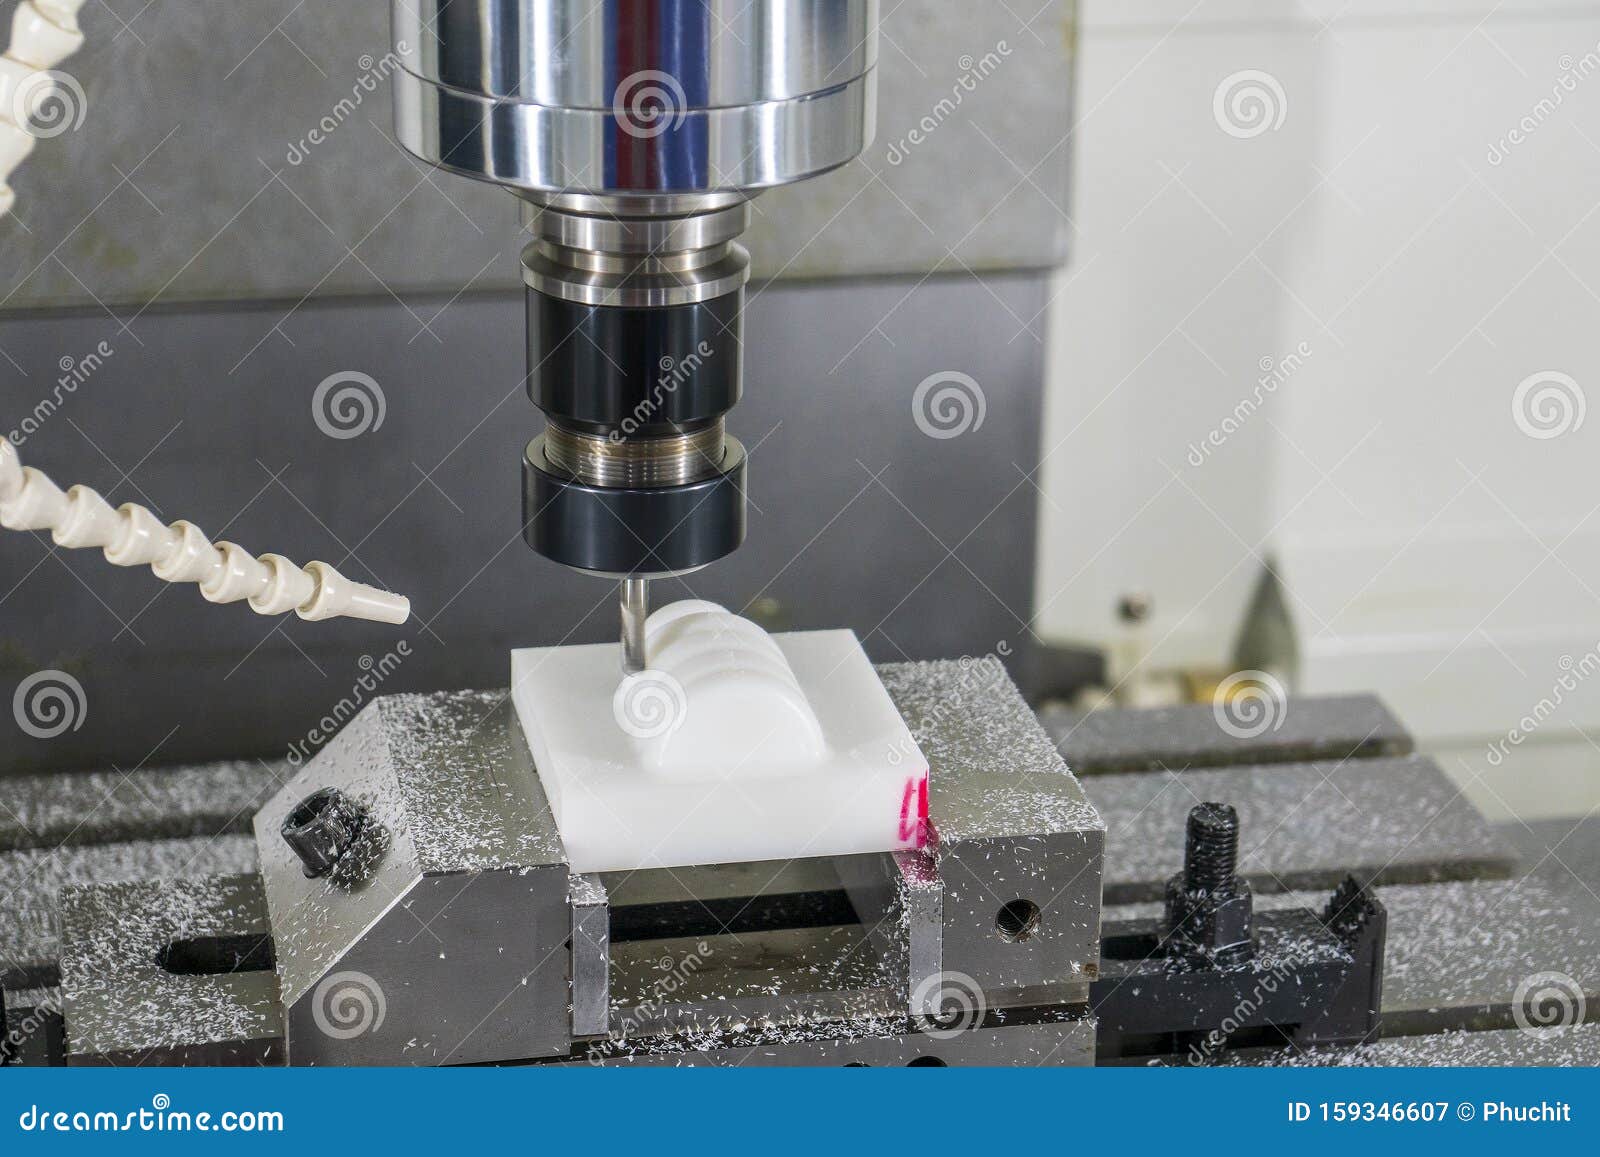 the cnc milling machine hi-precision cutting the plastic parts by solid ball endmill tool.